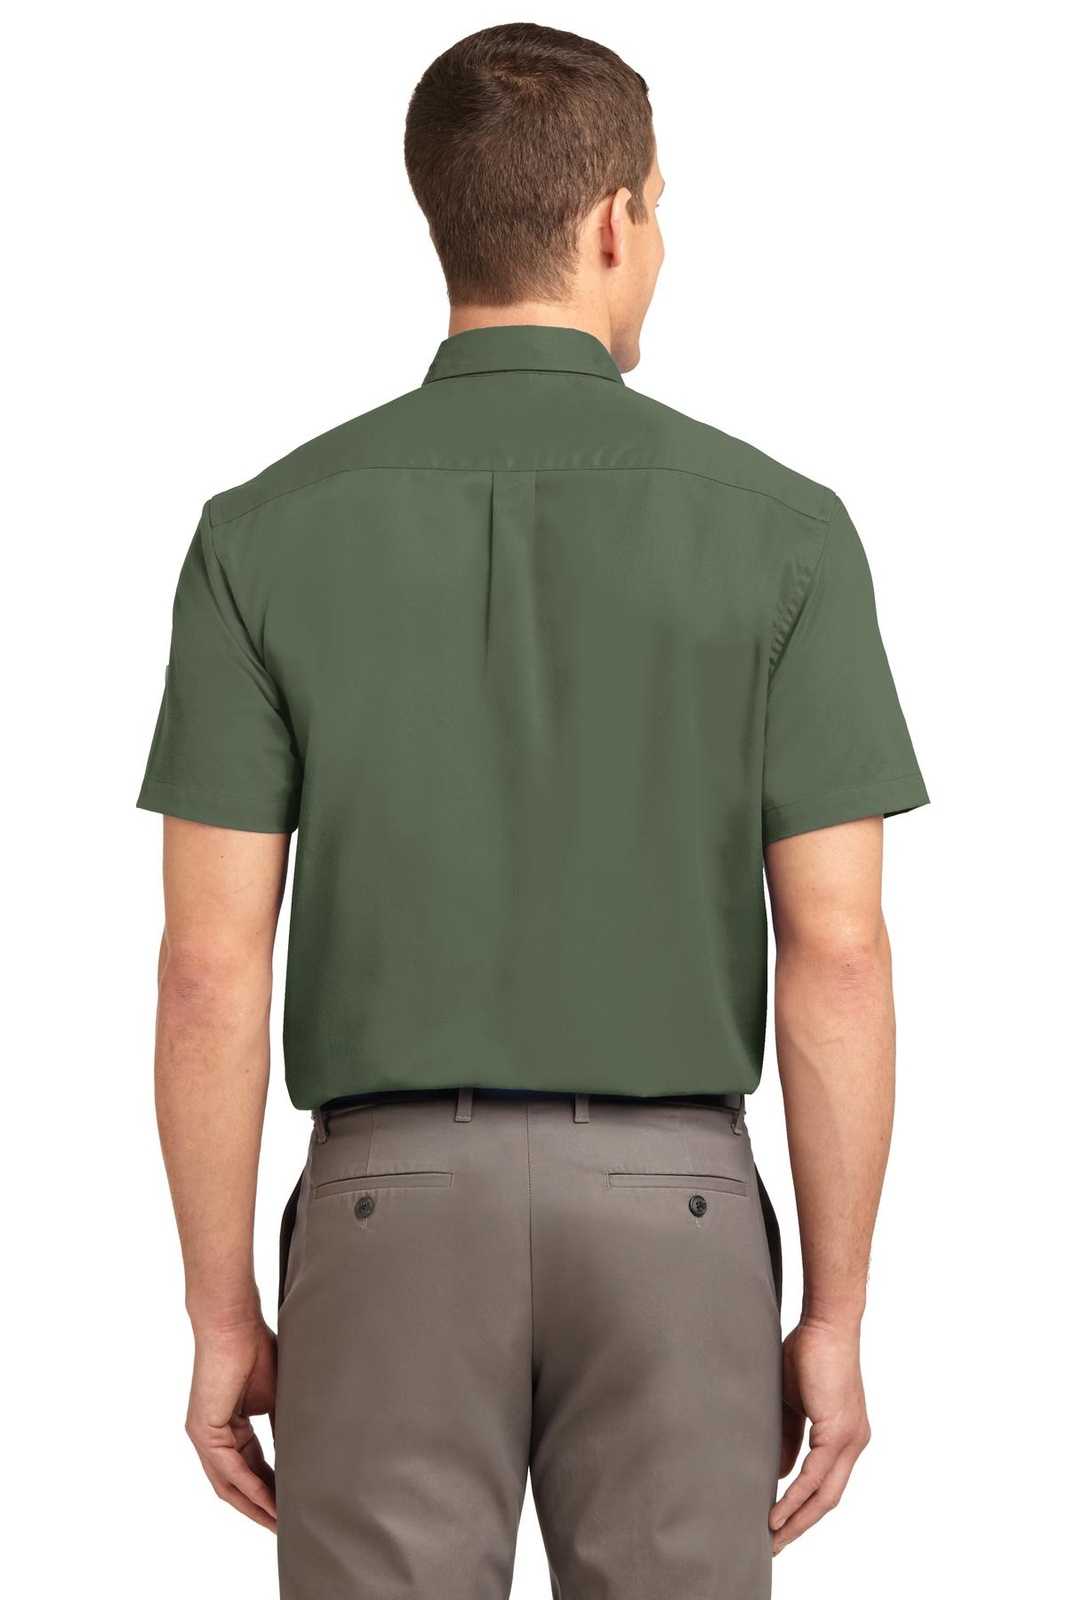 Port Authority S508 Short Sleeve Easy Care Shirt - Clover Green - HIT a Double - 1